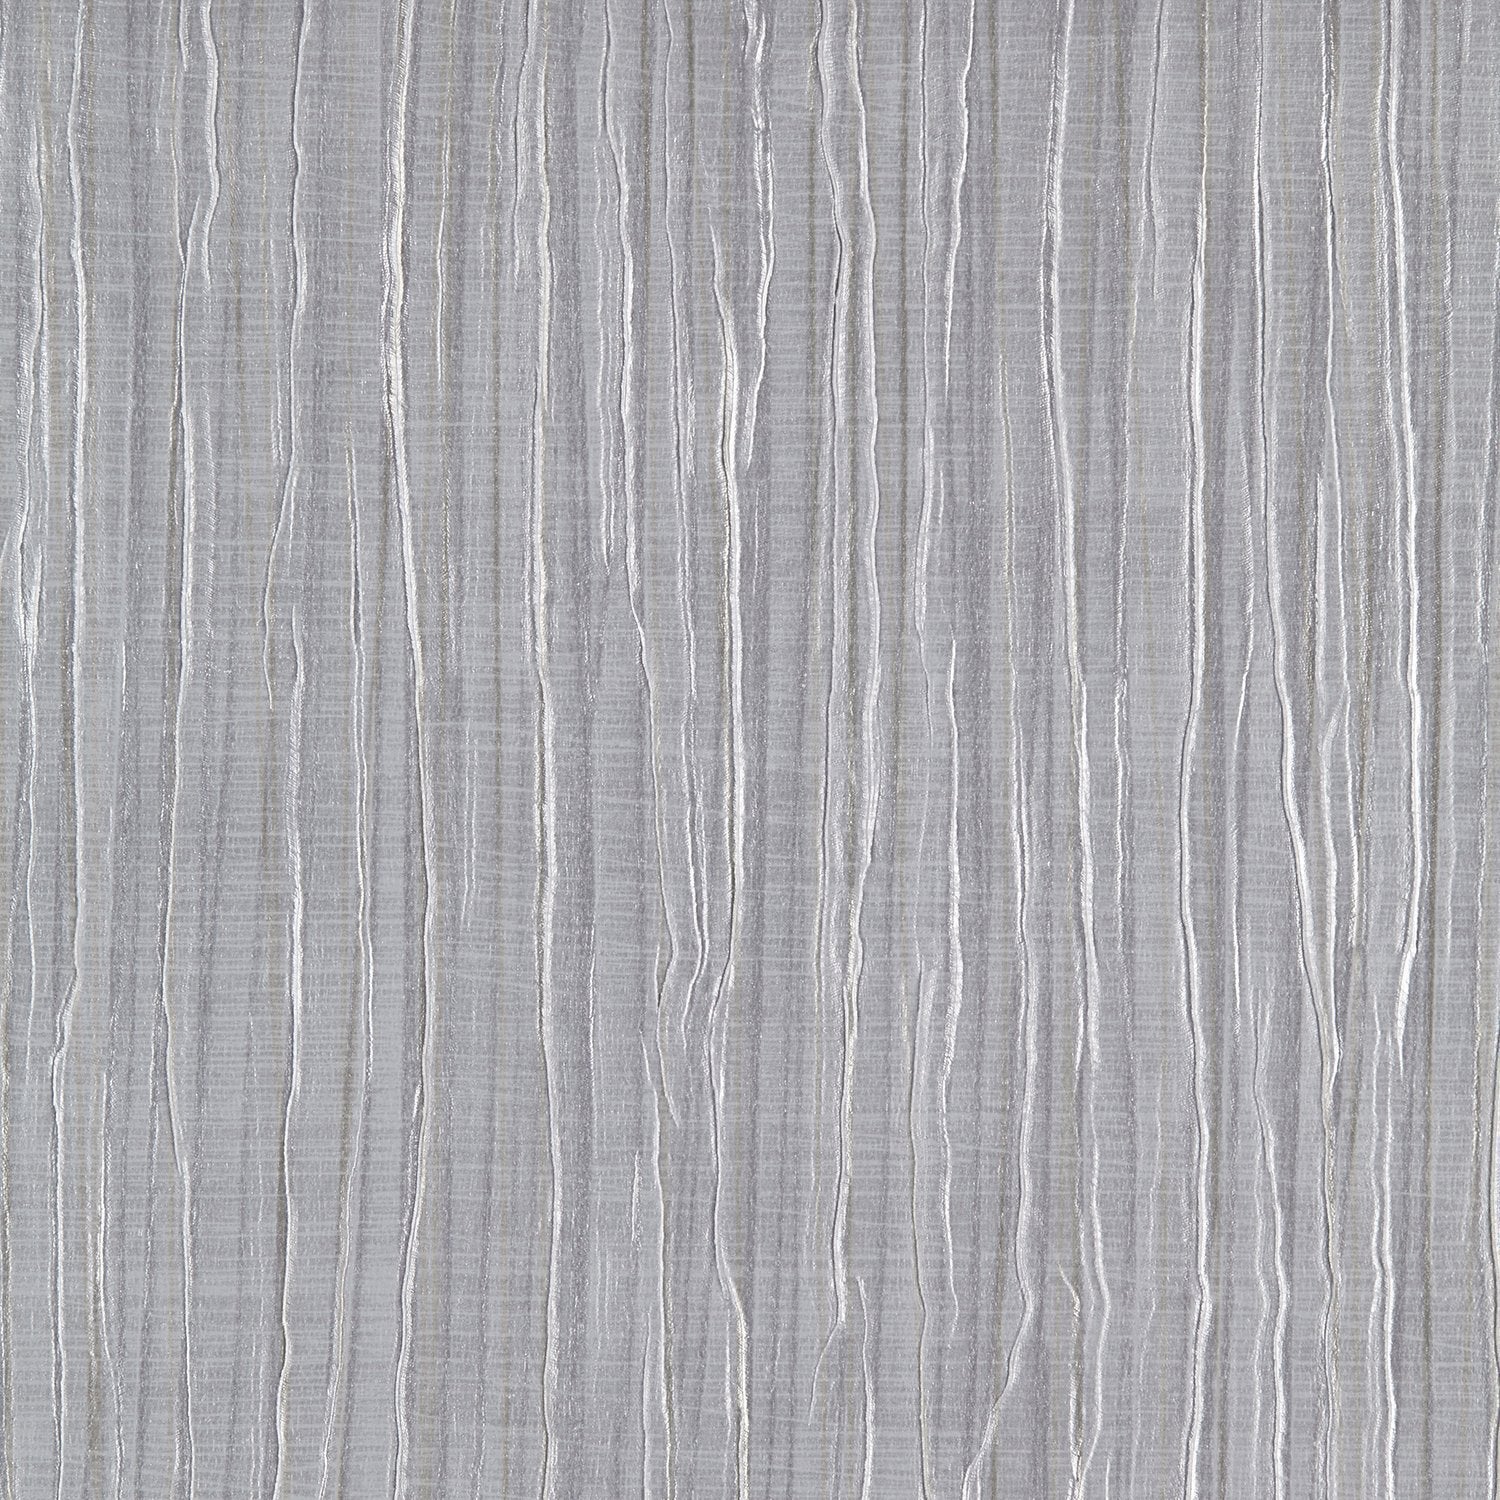 Vogue Pleat - Y47014 - Wallcovering - Vycon - Kube Contract